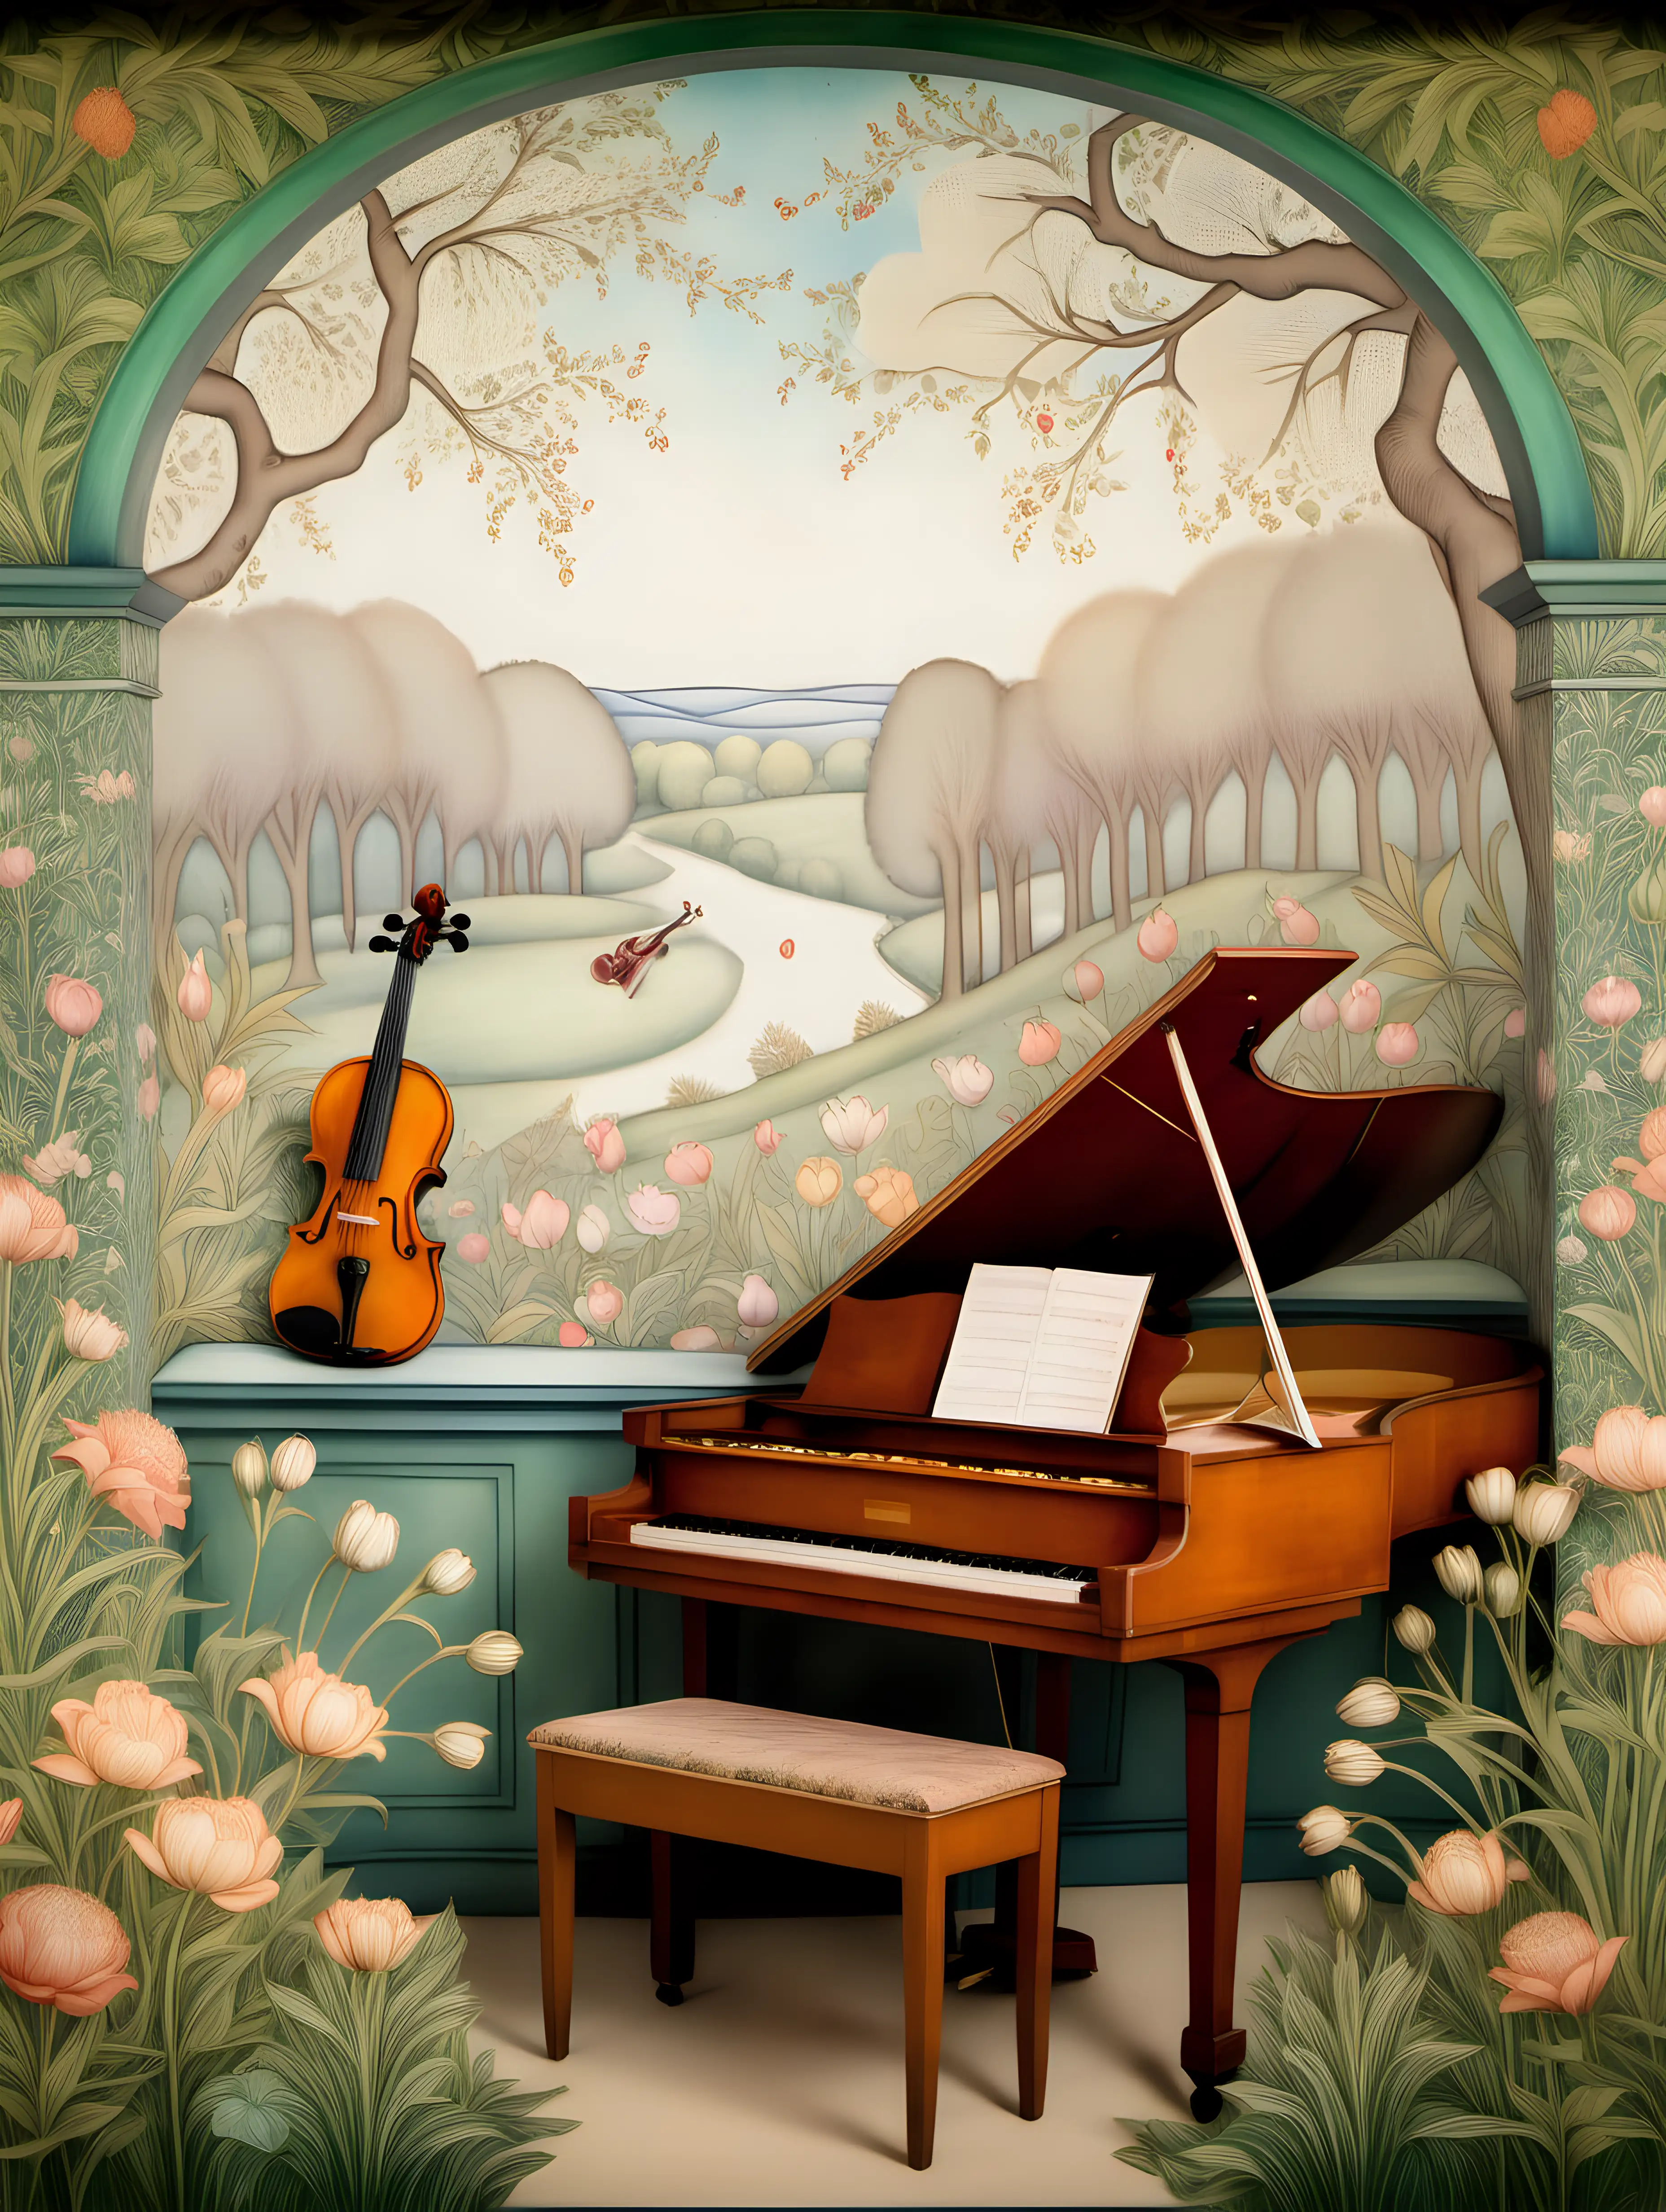 Dreamy William Morris Style Painting of Flowers with Violin and Piano in Spring Setting